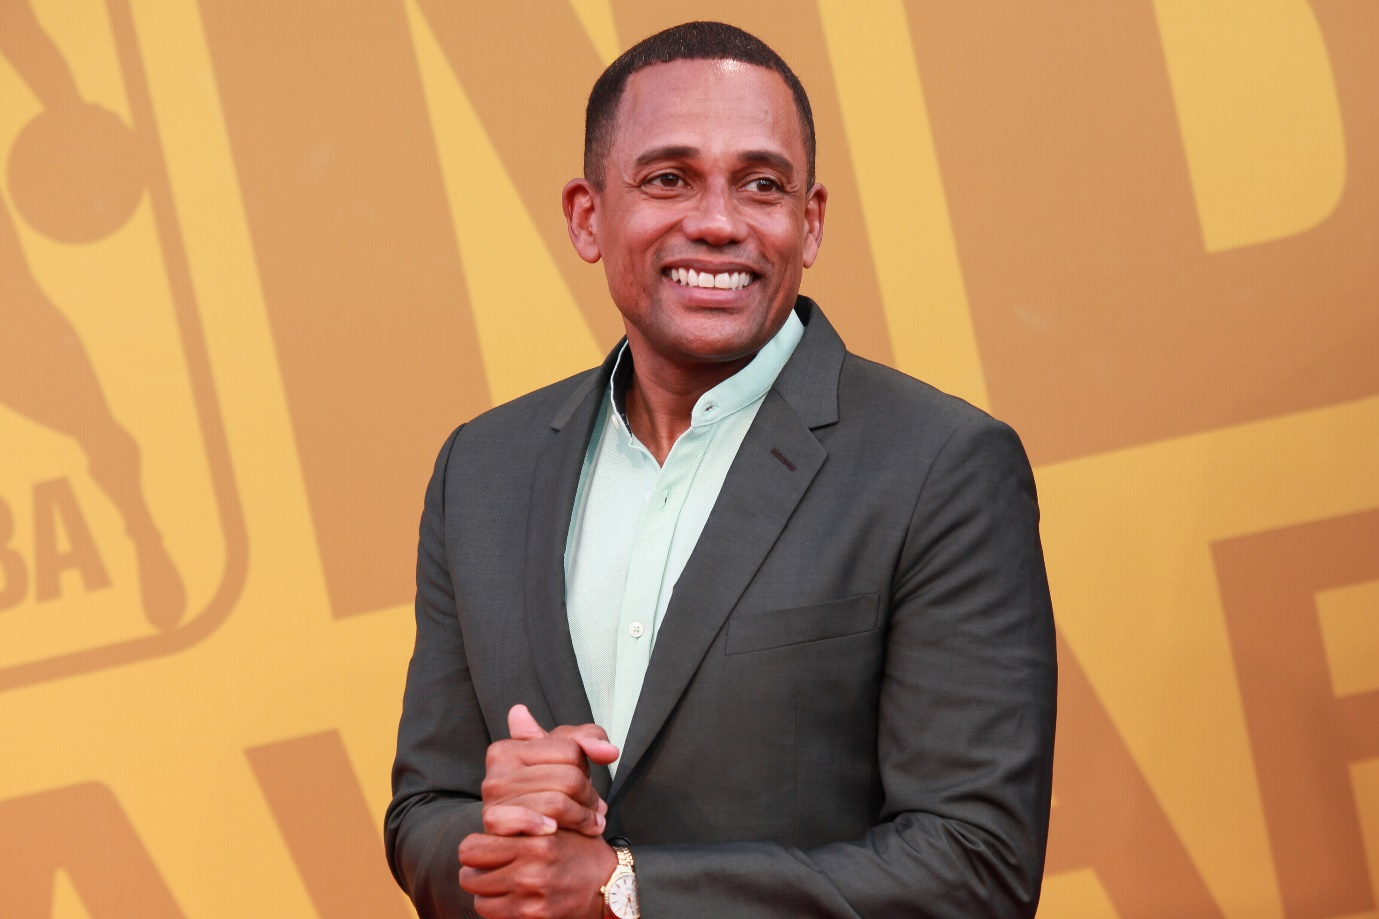 Money OR Wealth? The Black Wall Street Founder, Author & Actor Hill Harper’s Secrets To Making Both